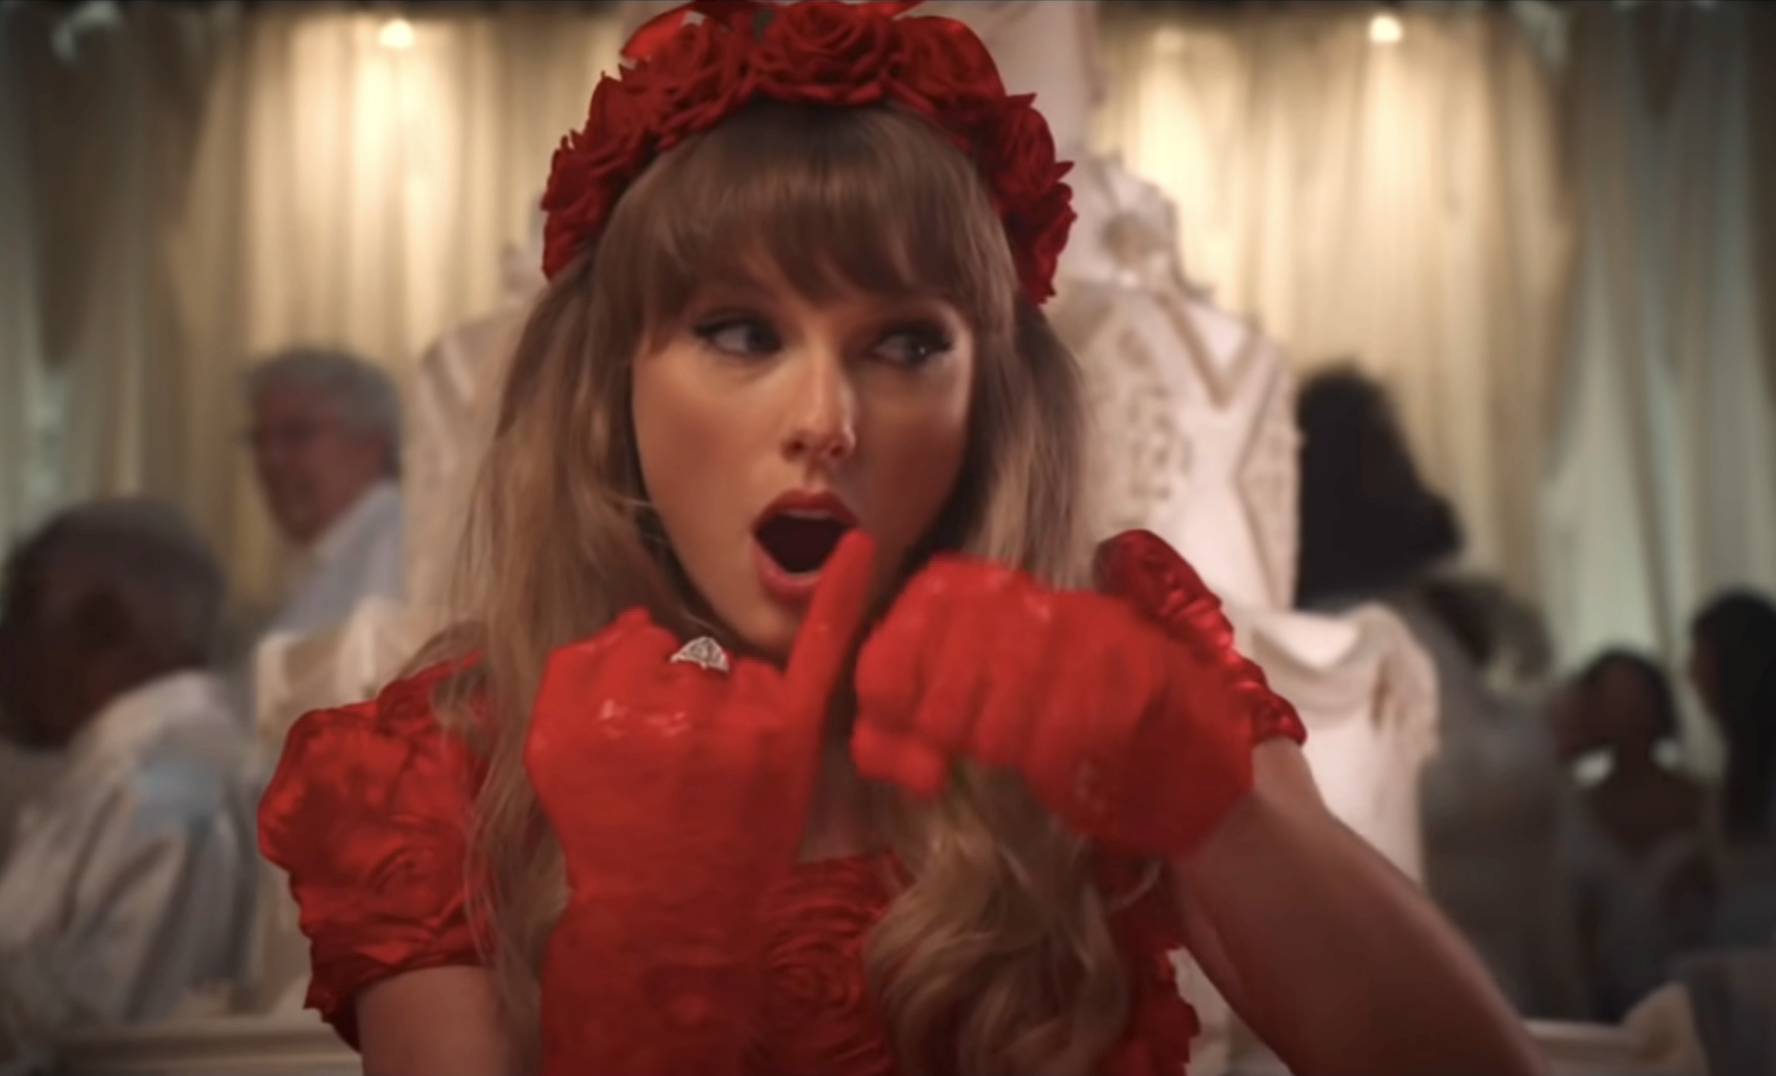 Taylor in a video